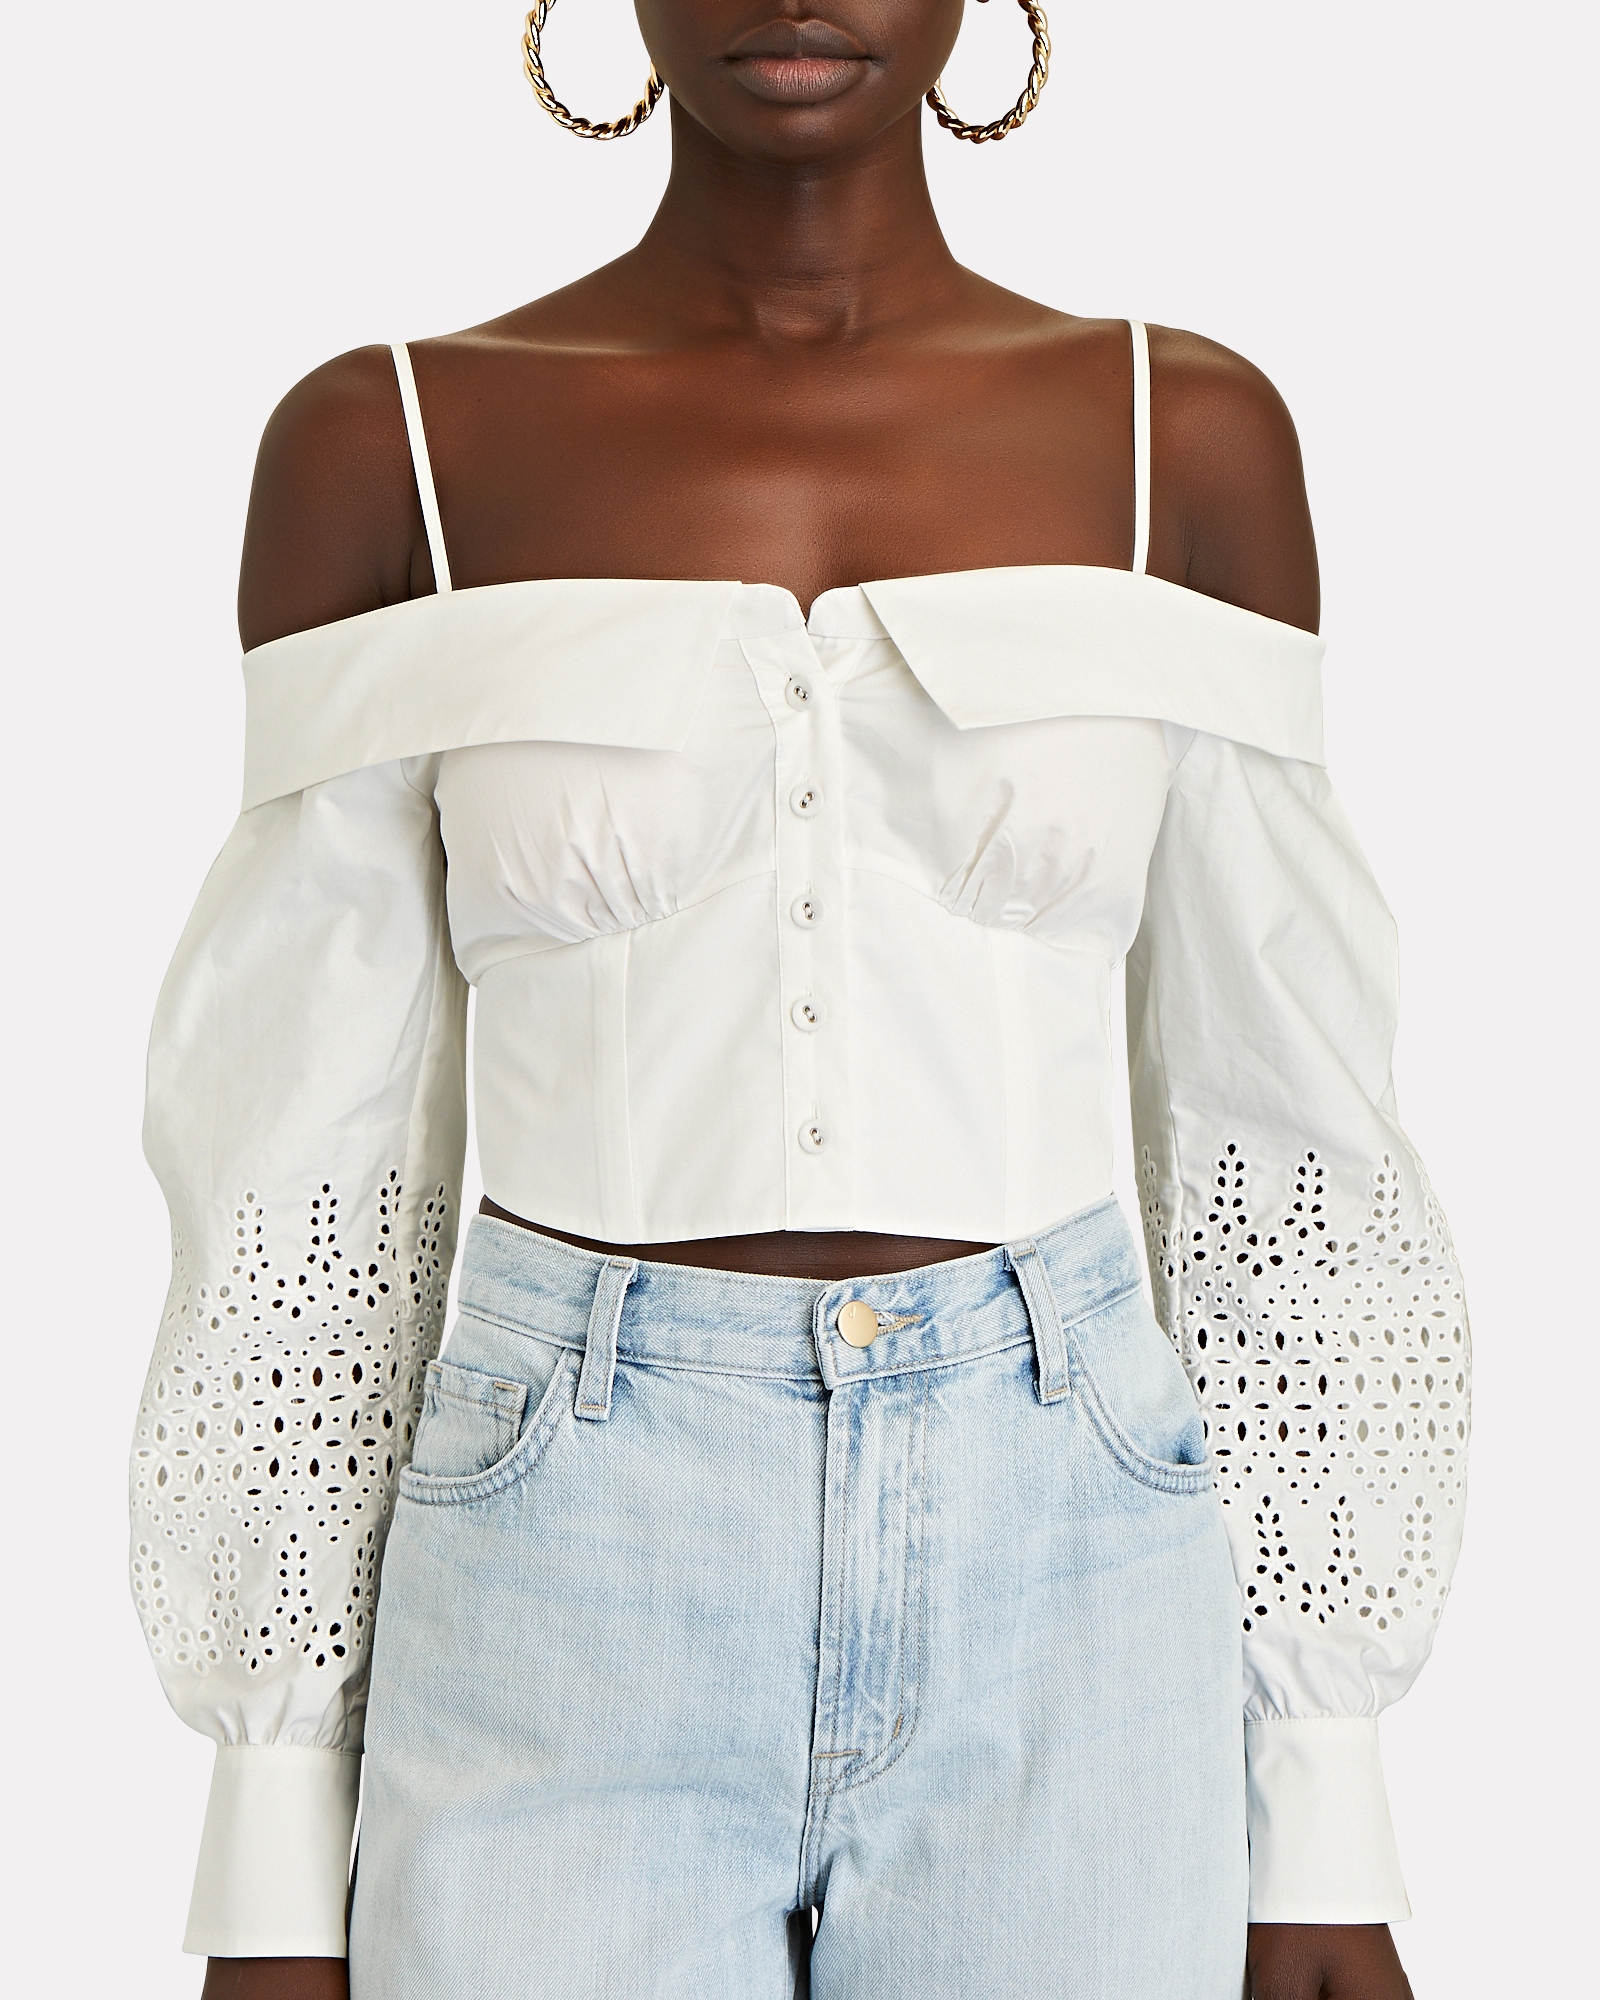 Self-Portrait Broderie Anglaise Off-the-Shoulder Top | INTERMIX®